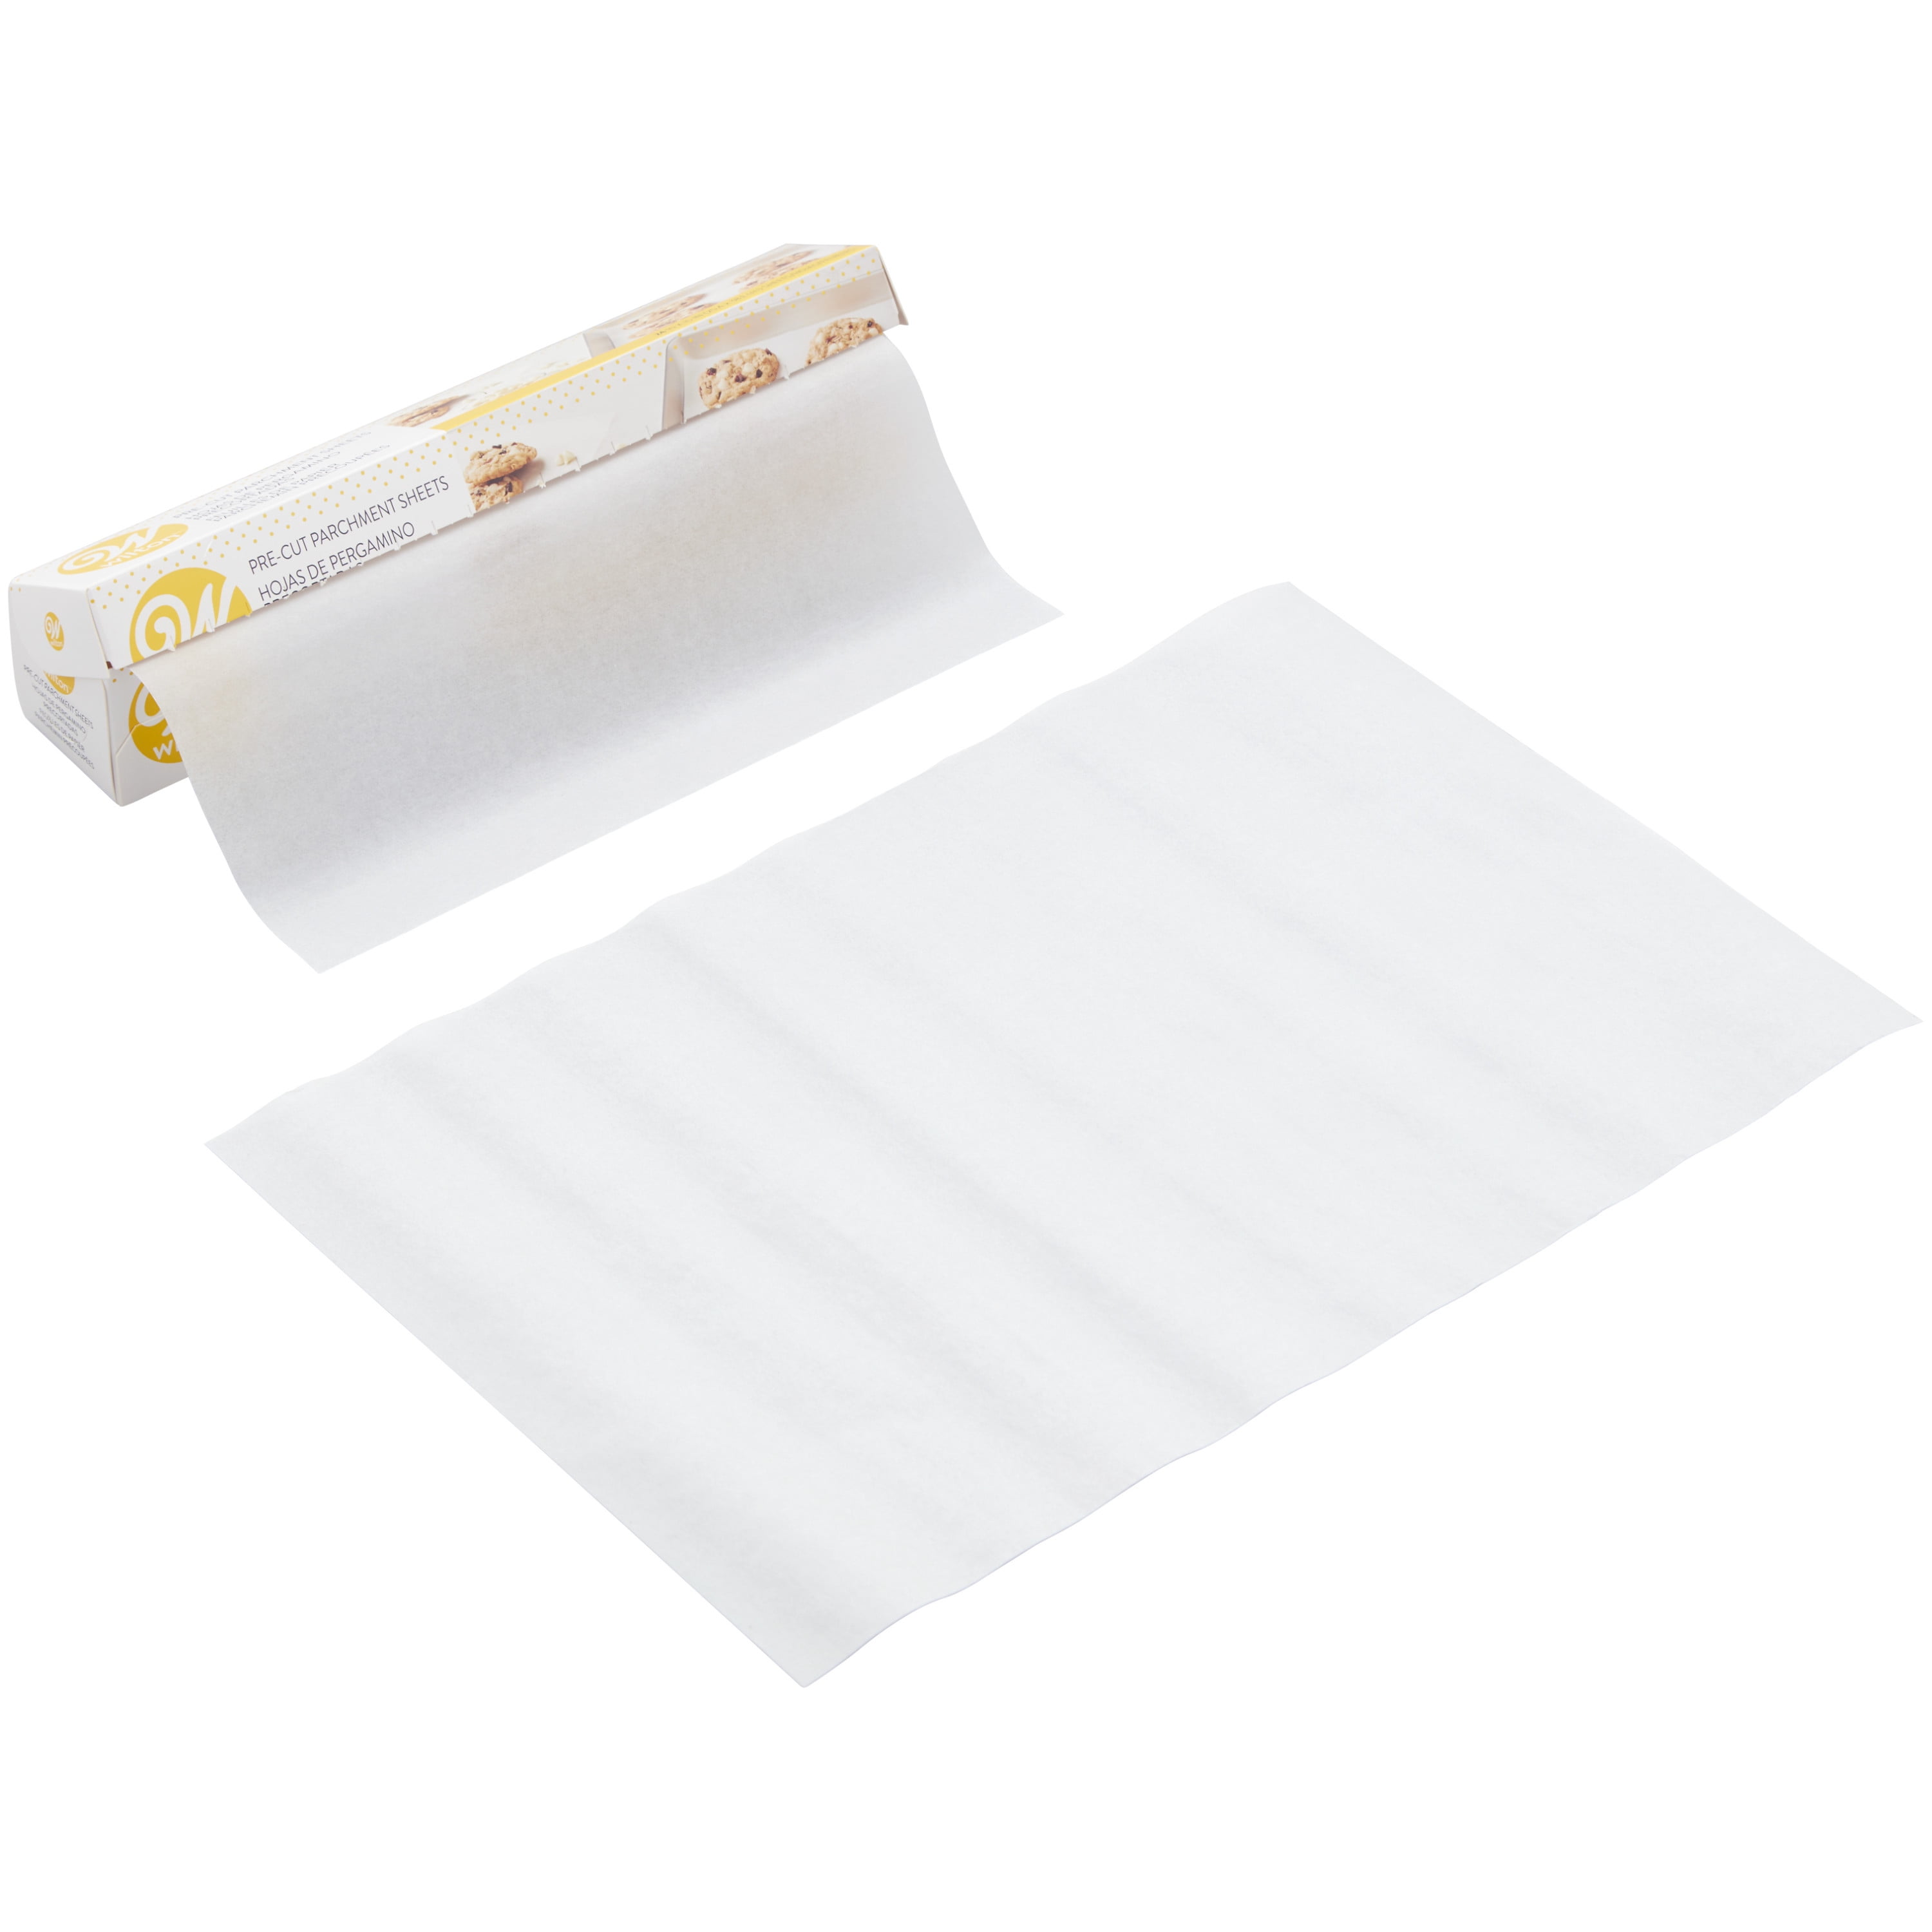 Pre-cut Parchment Sheets, 13x16.5, 30 pcs on roll in box